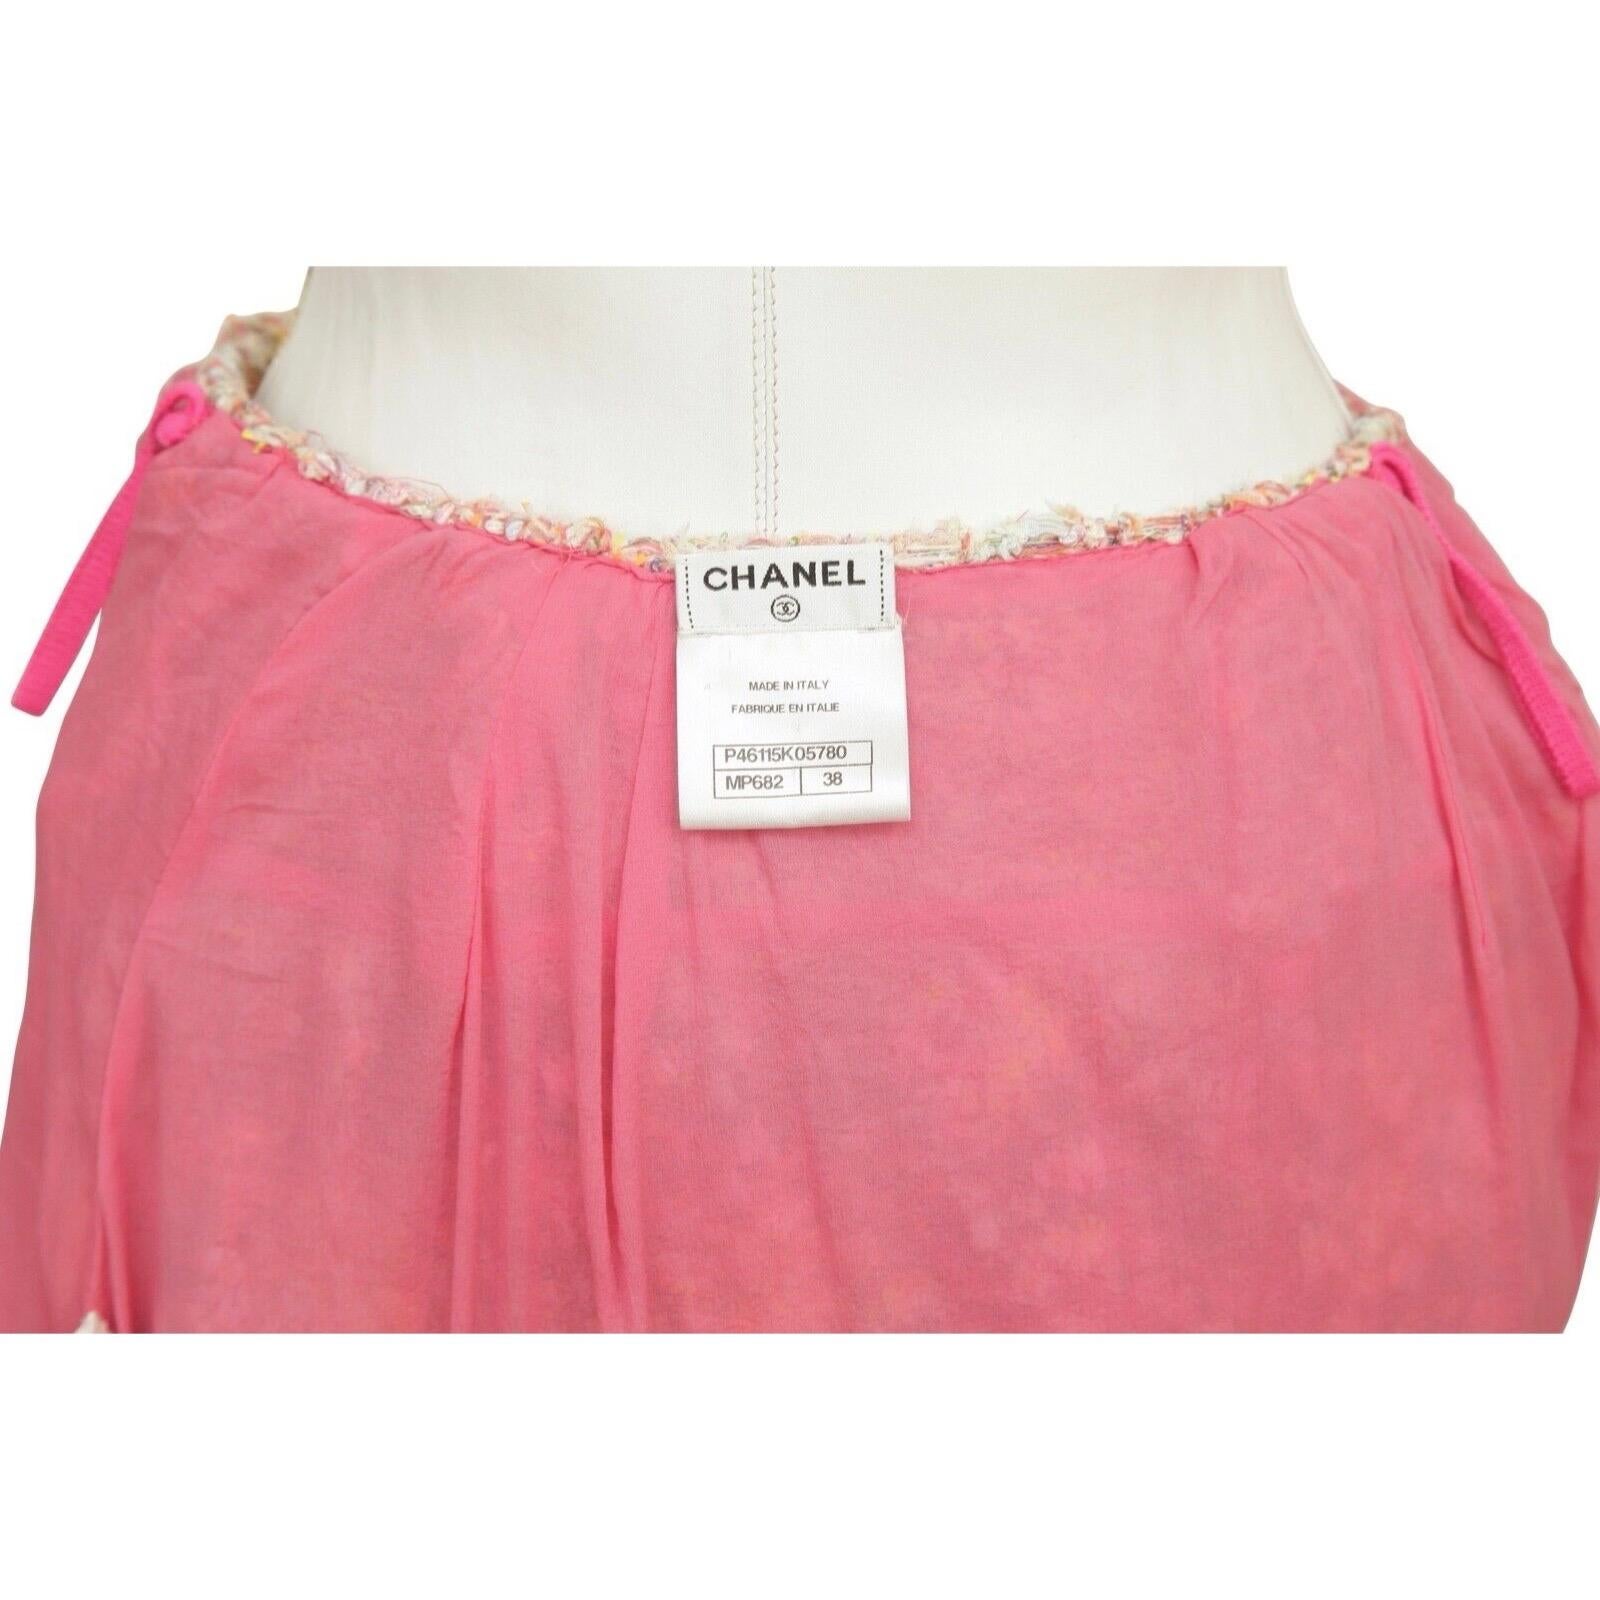 CHANEL Skirt Tweed Fantasy Pink Multi-Color High Waisted Lined Sz 38 In Excellent Condition In Hollywood, FL